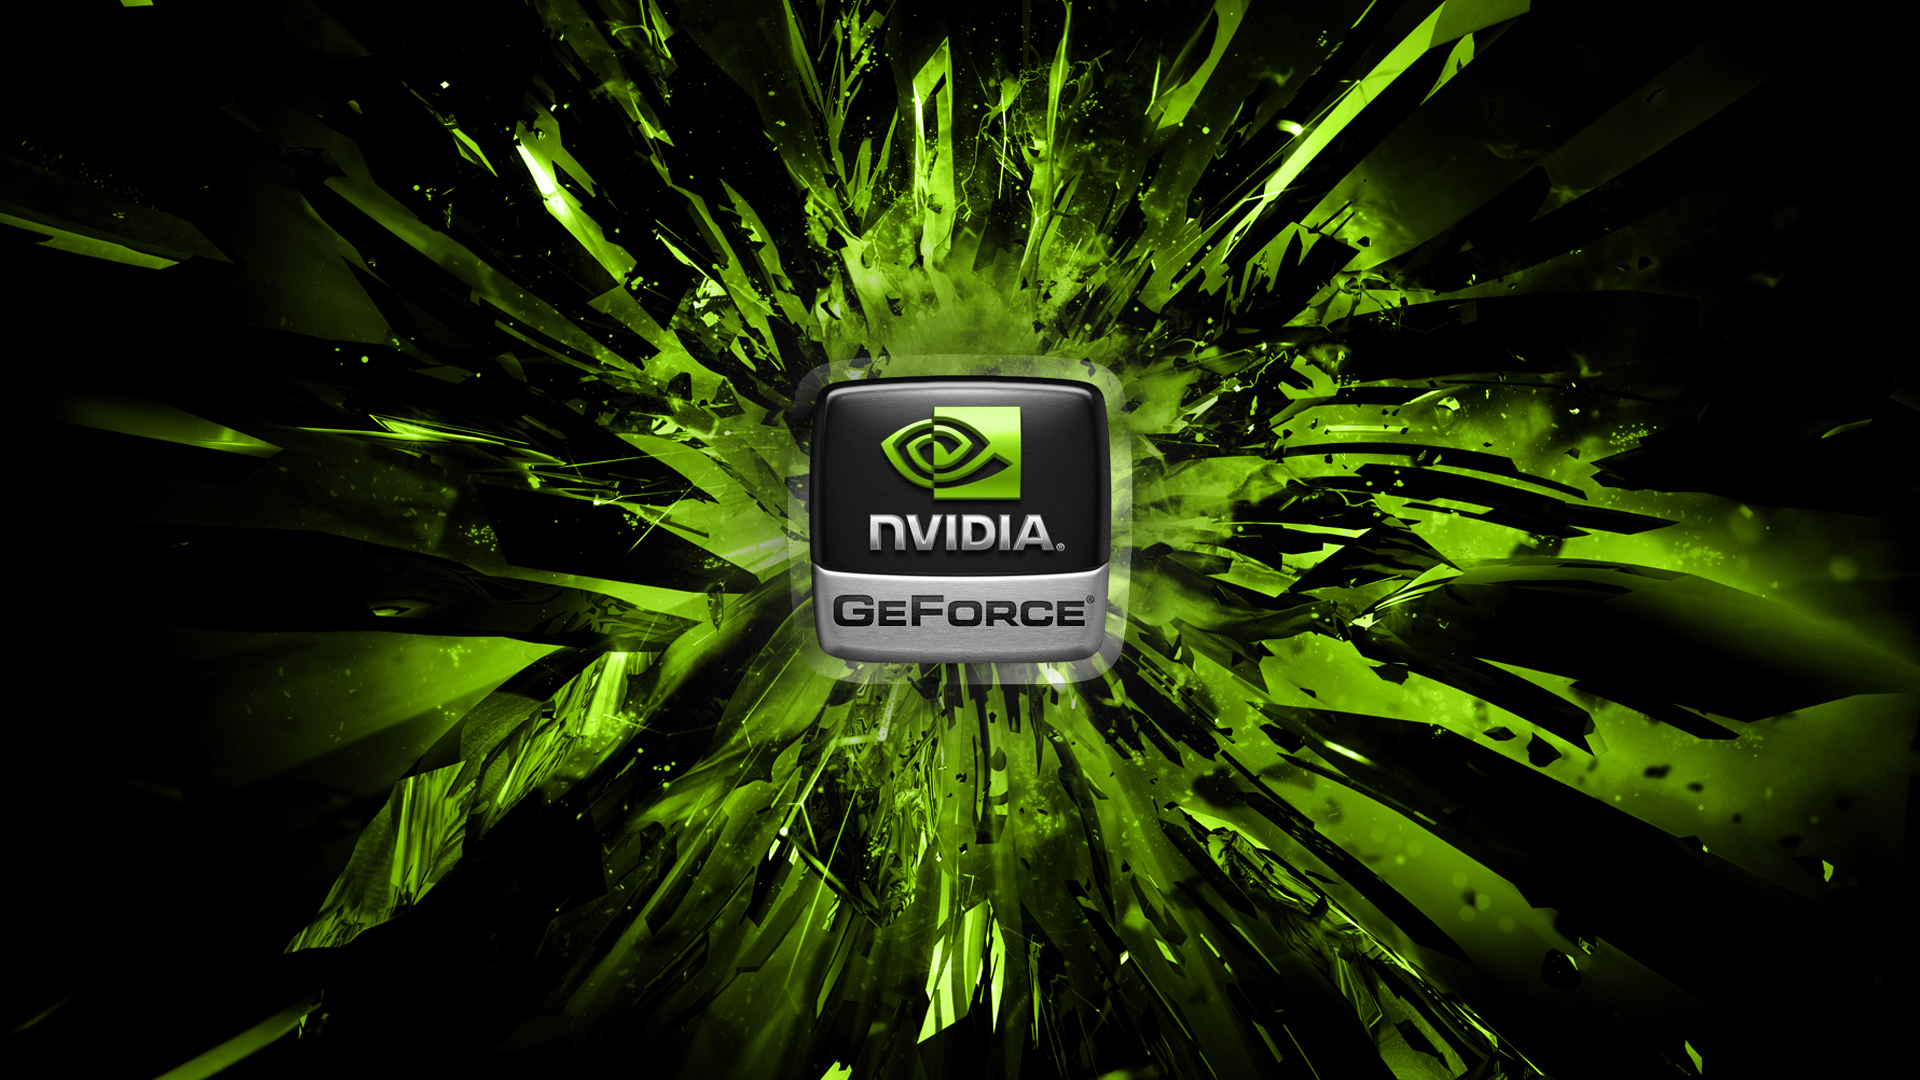 Nvidia S Geforce Gpus Are An Excellent Option For Setting Up A Pc